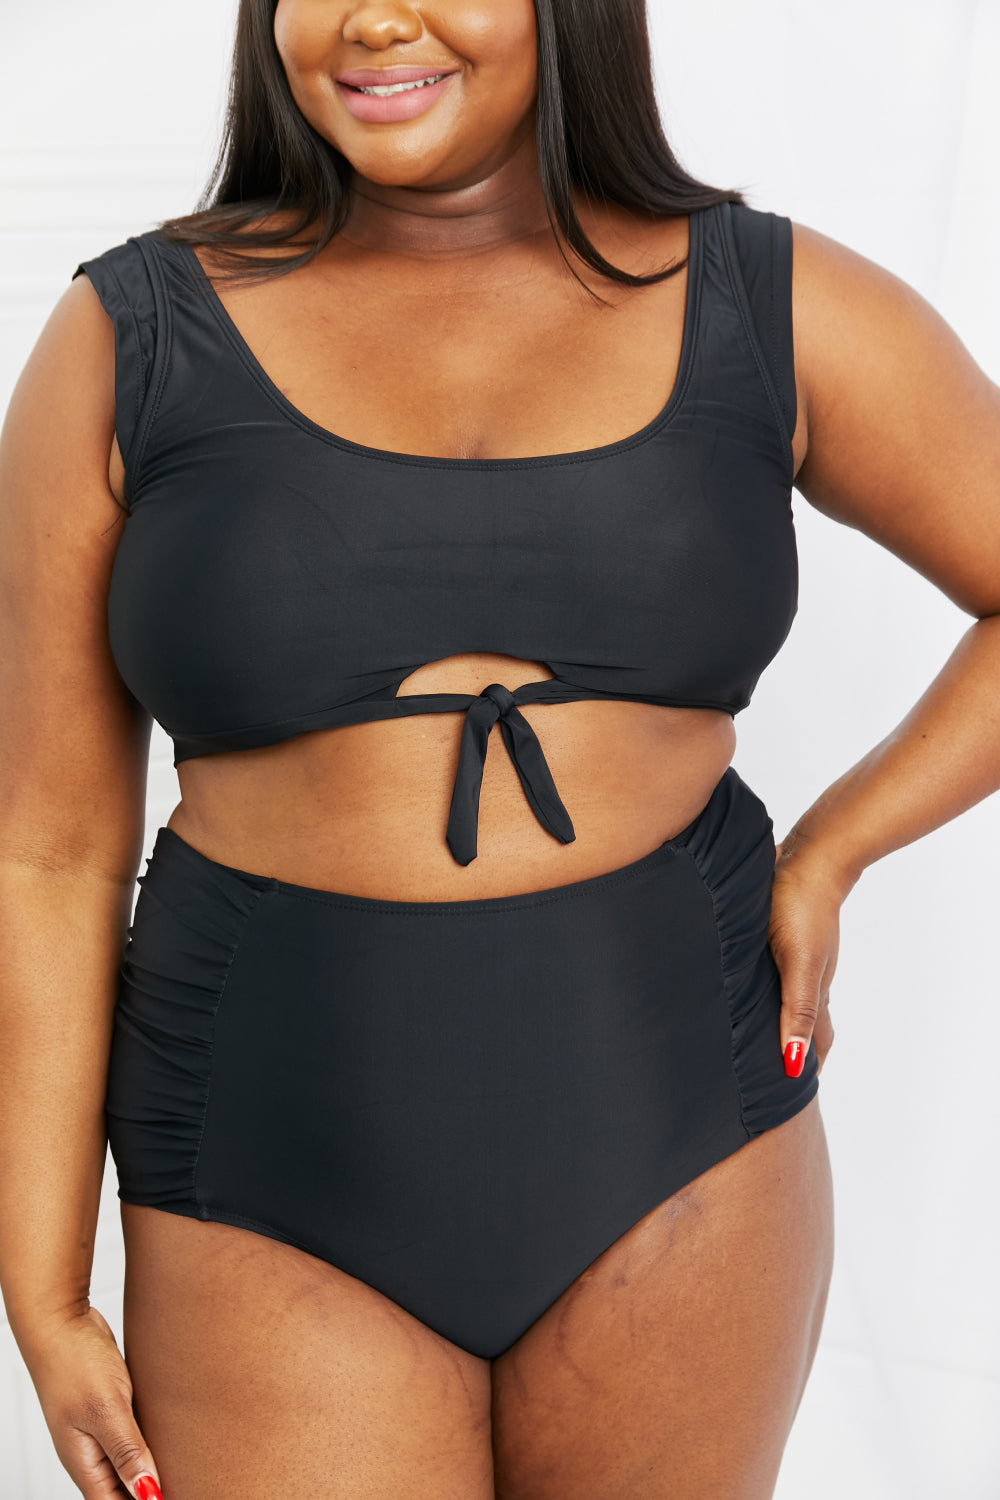 Sanibel Crop Swim Top and Ruched Bottoms Set in Black - Kawaii Stop - Beach, High Waist, Marina West Swim, Removable Padding, Retro-Inspired, Ruched Bottoms, Ship from USA, Swimwear Set, Trendy, Two-Piece Swimsuit., Women's Clothing, Women's Clothing &amp; Accessories, Women's Fashion